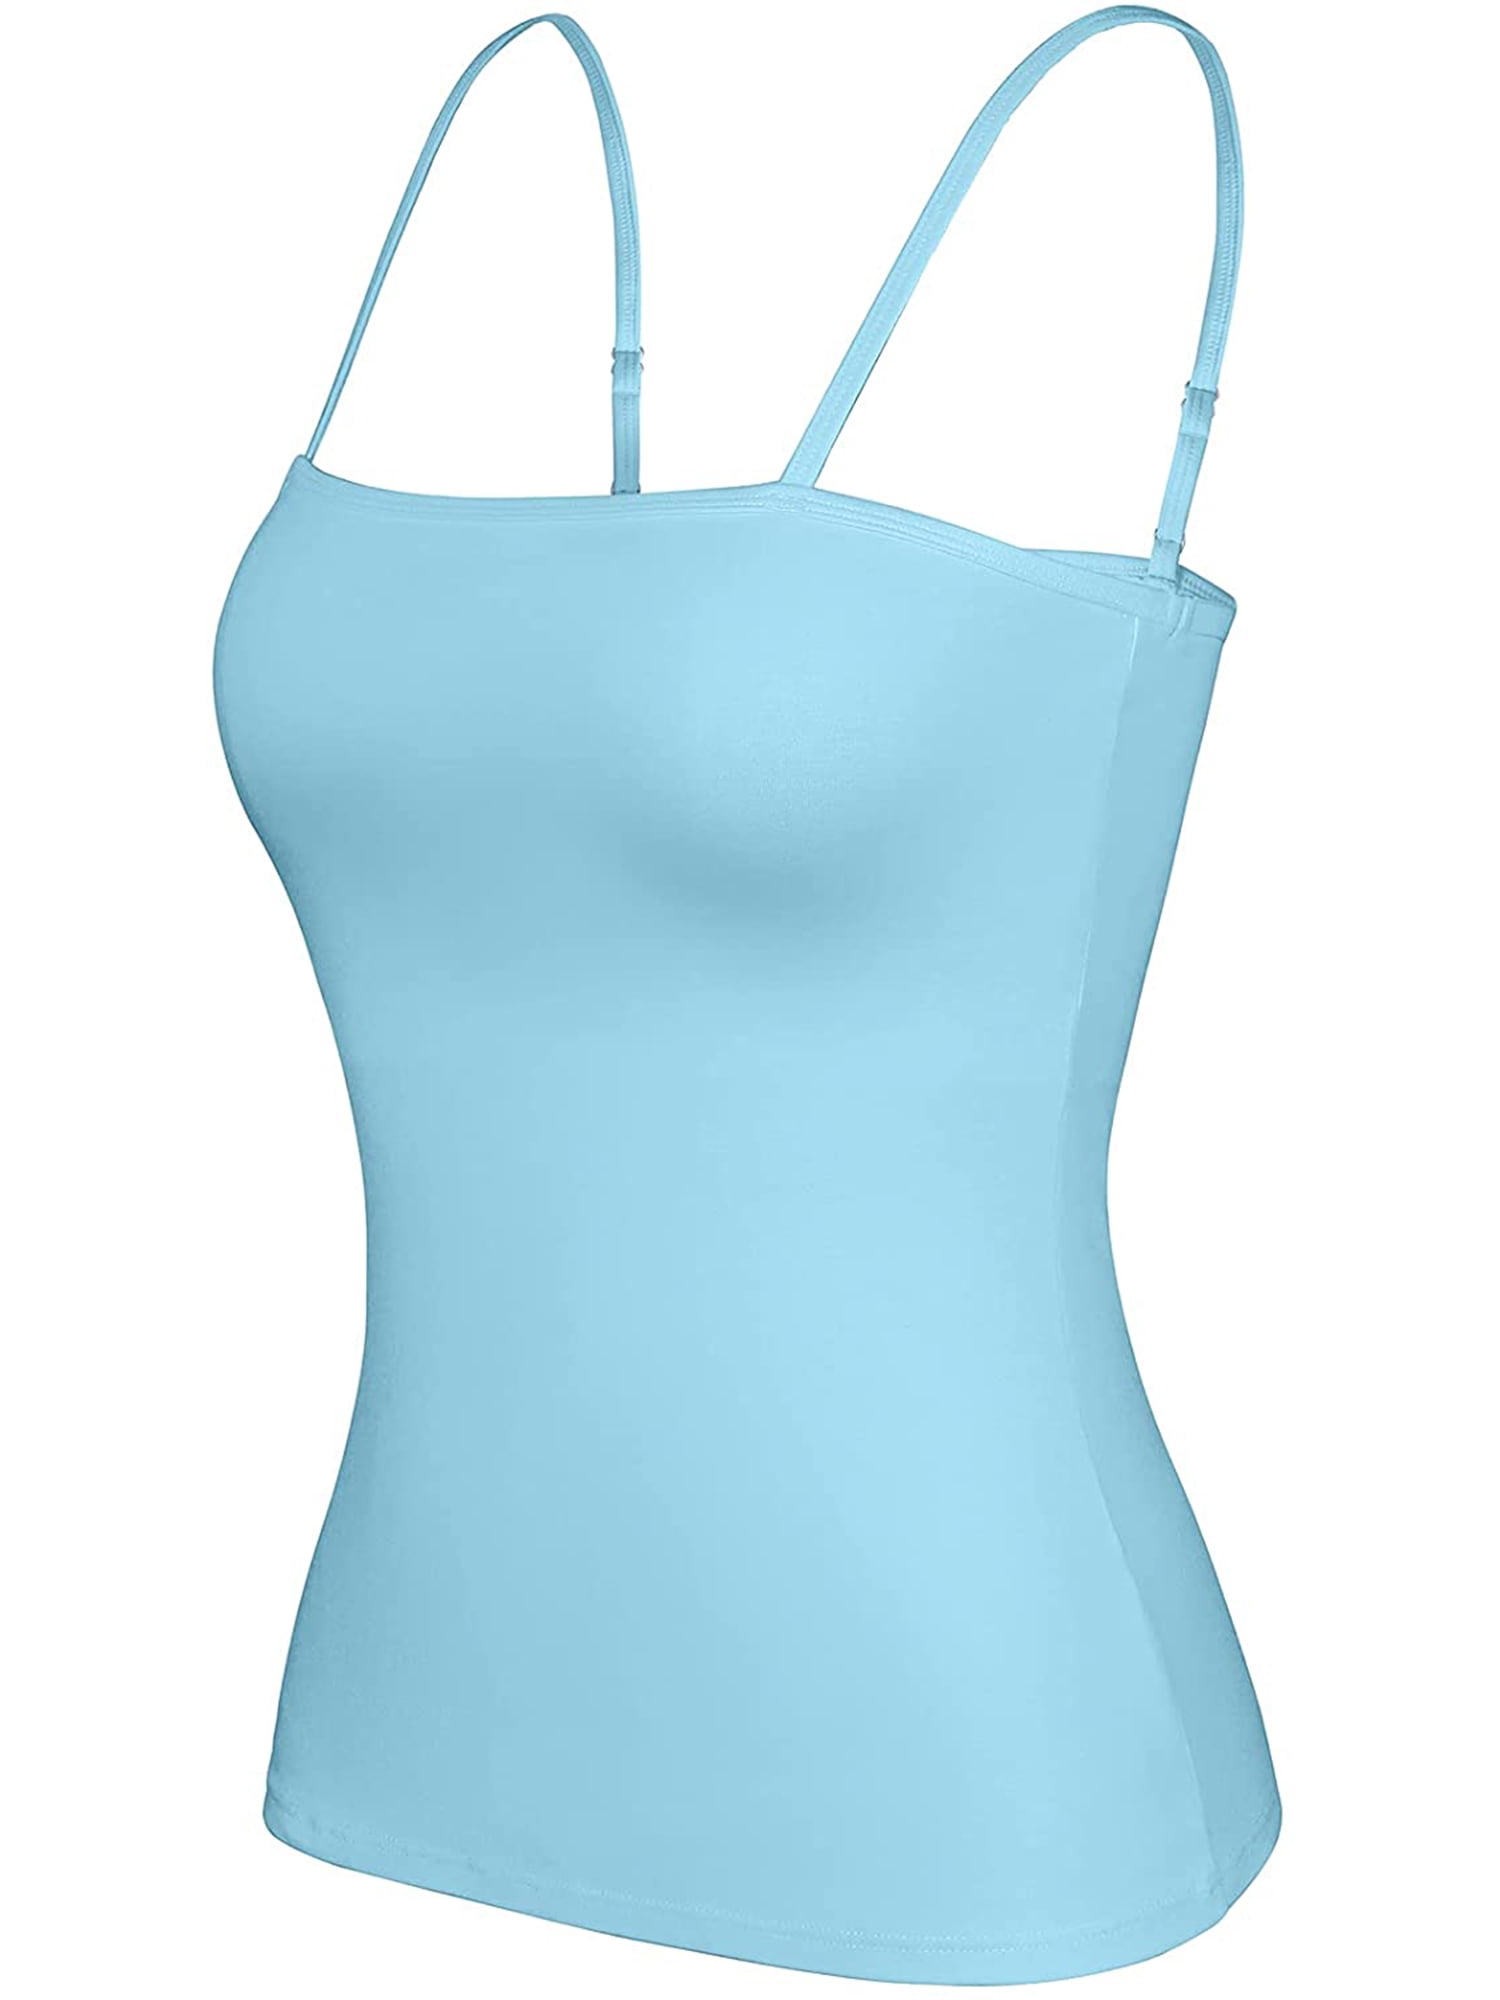 Anyfit Wear Camisoles for Women with Built in Bra Adjustable Strap